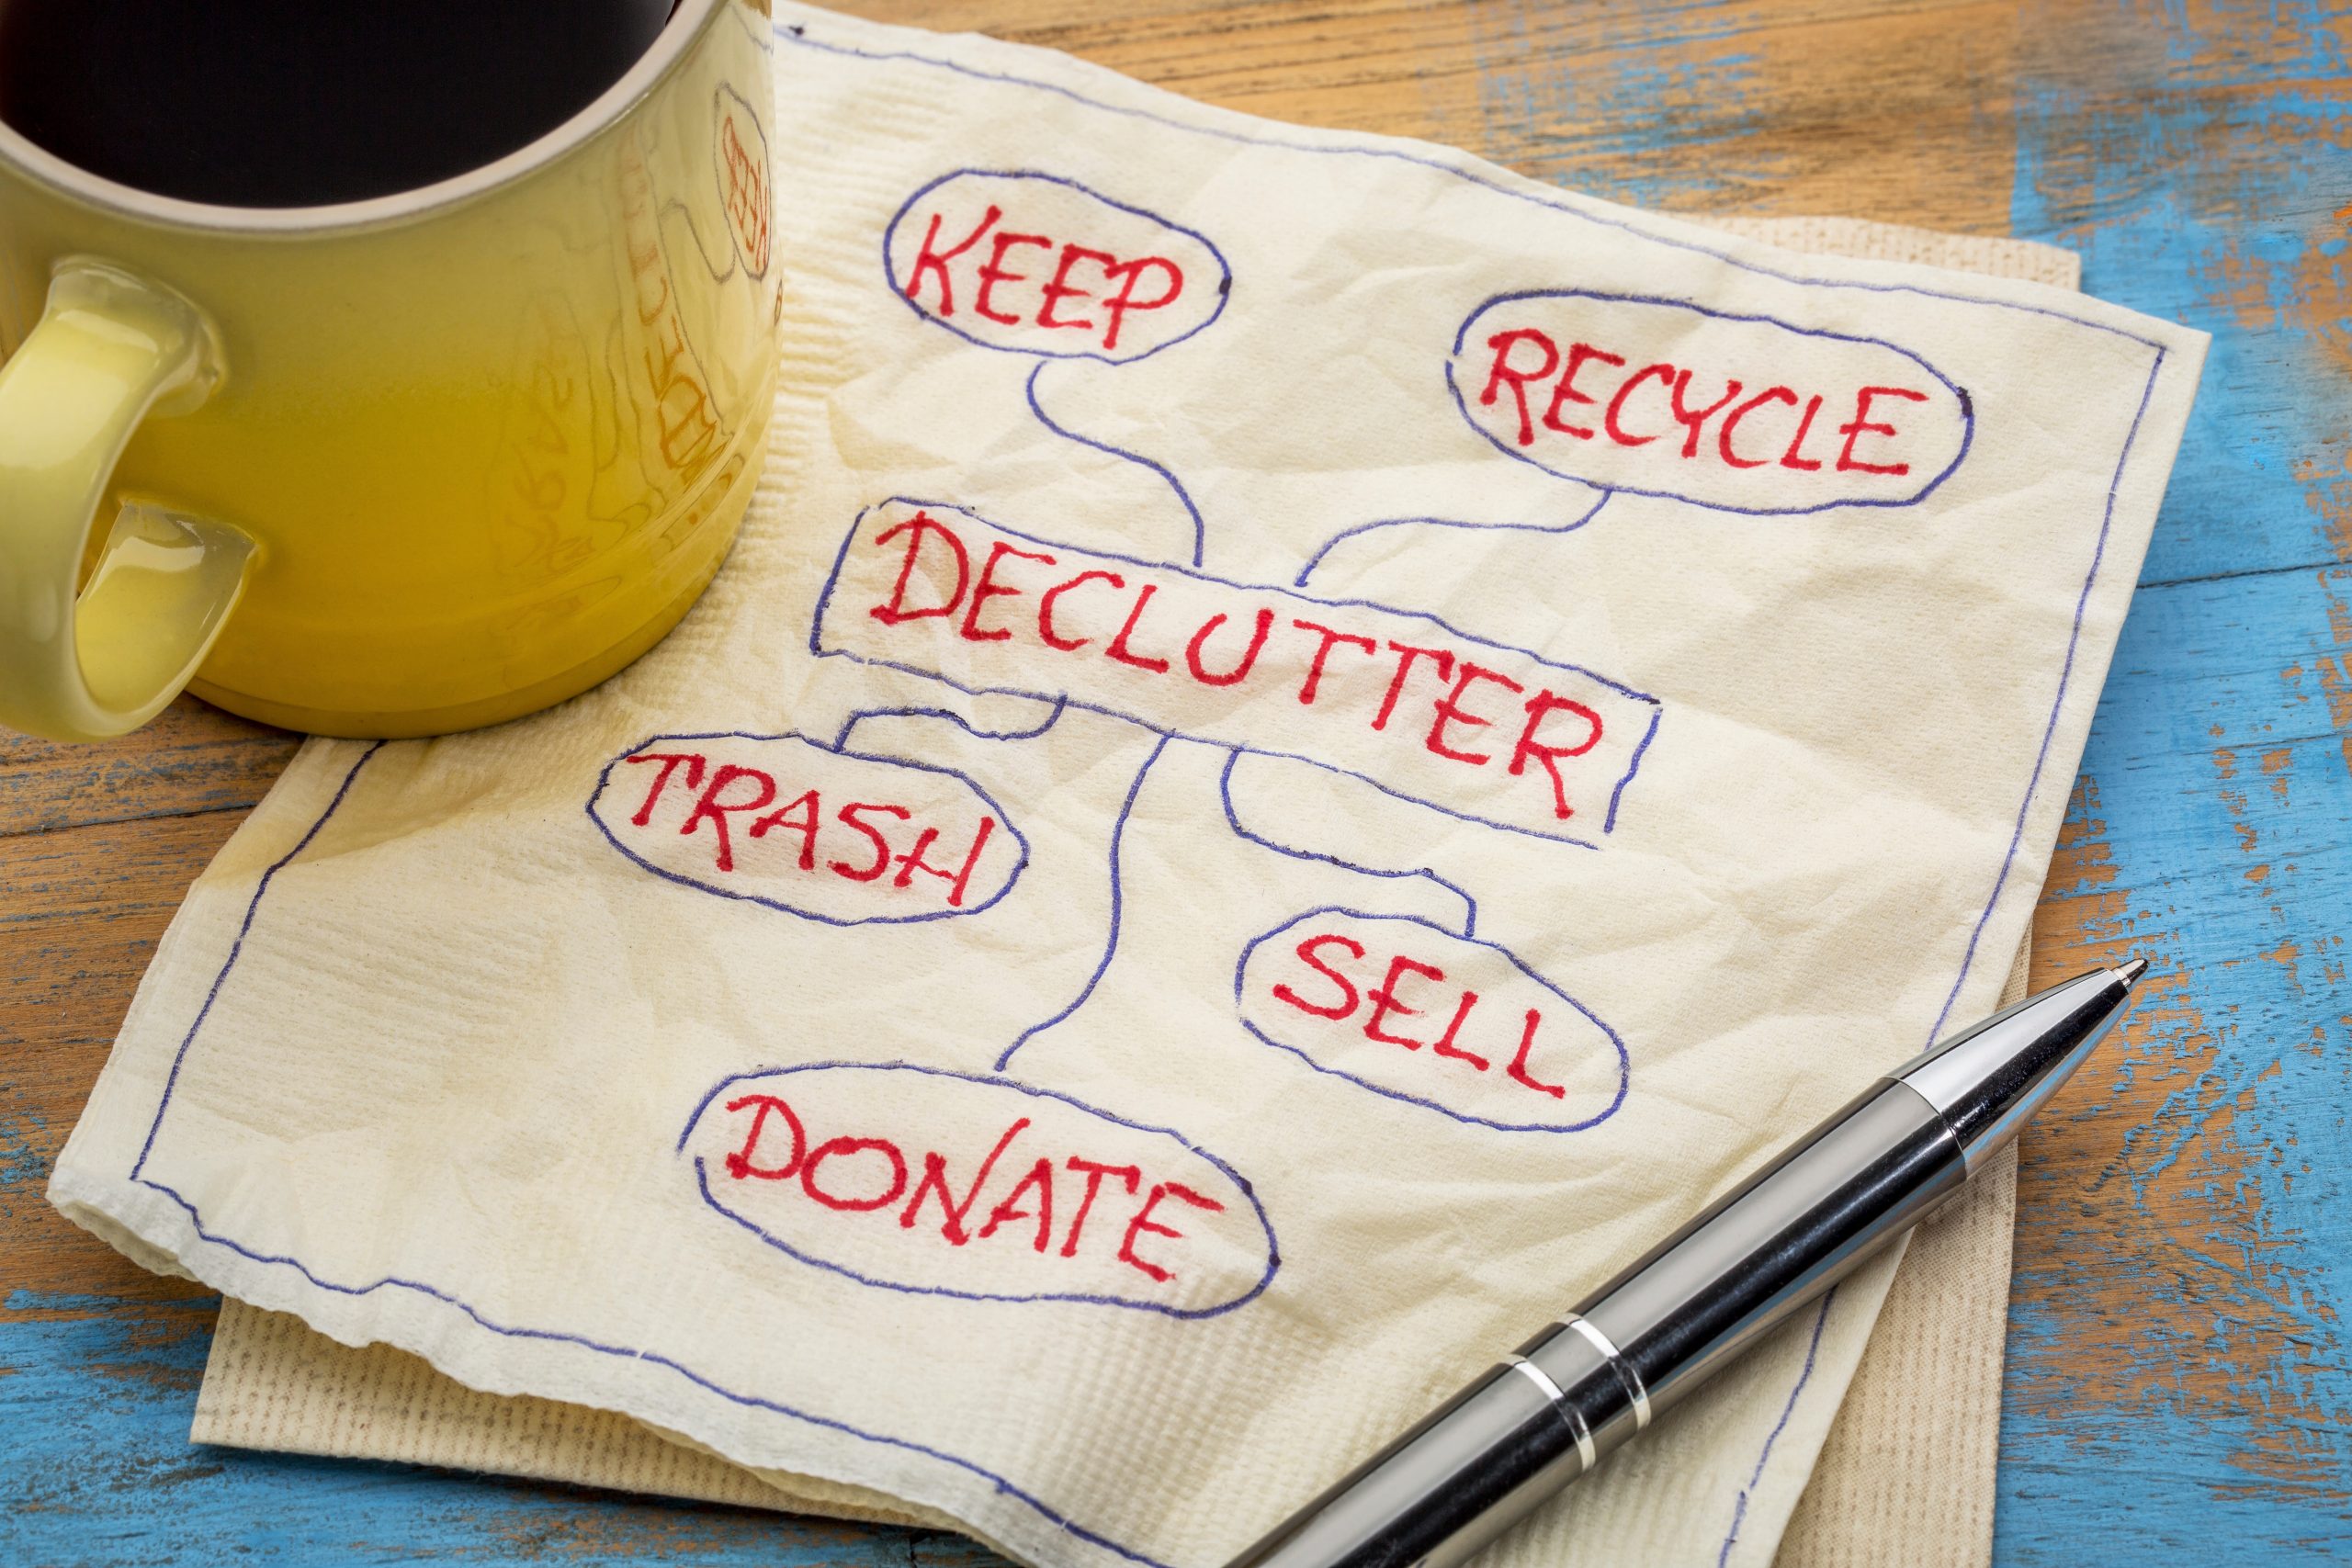 decluttering concept (keep, recycle, trash, sell, donate - handwriting on napkin with a cup of coffee